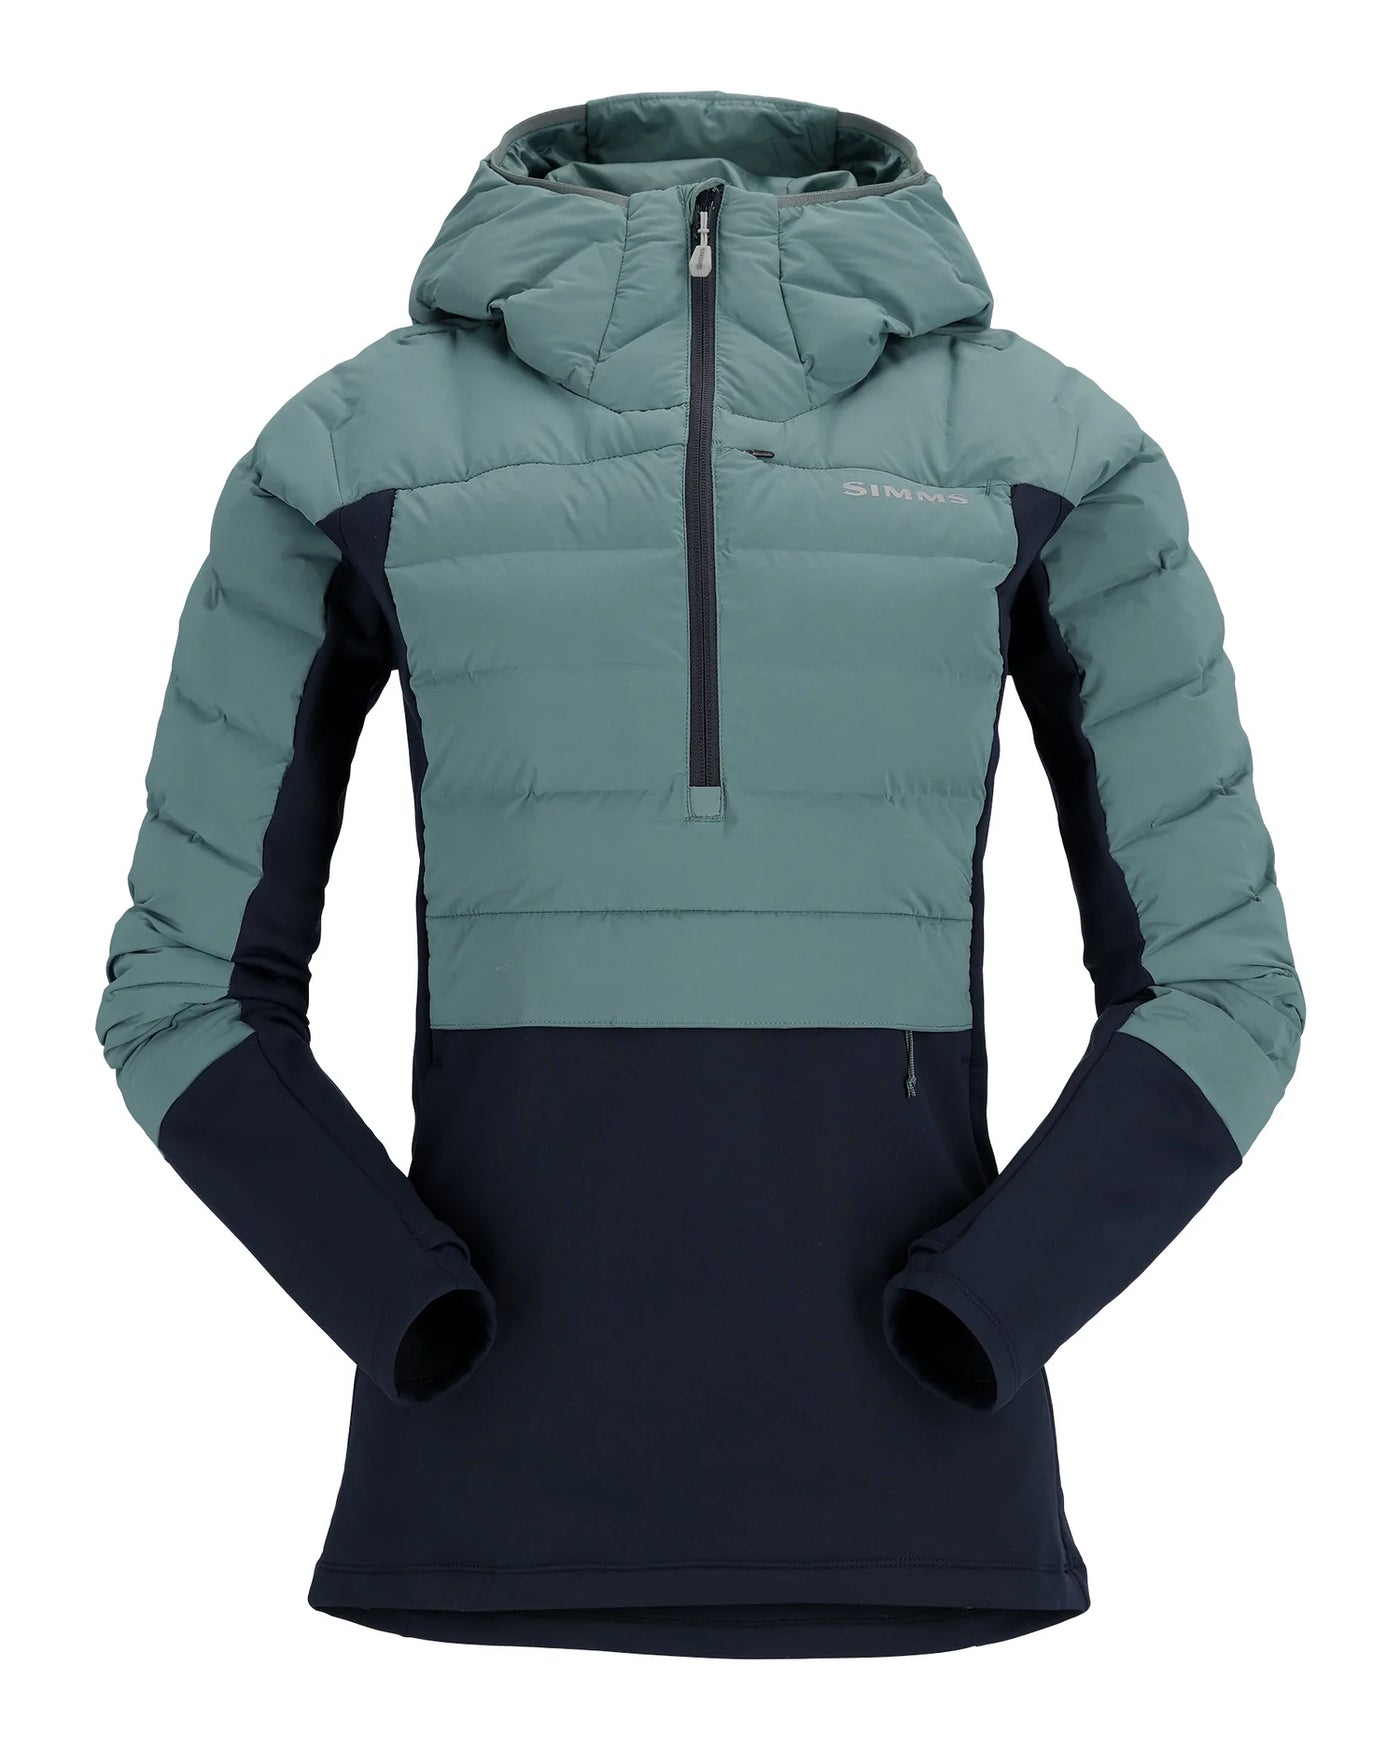 Simms Women's ExStream Pull-Over Insulated Hoody SALE Now 40% Off!